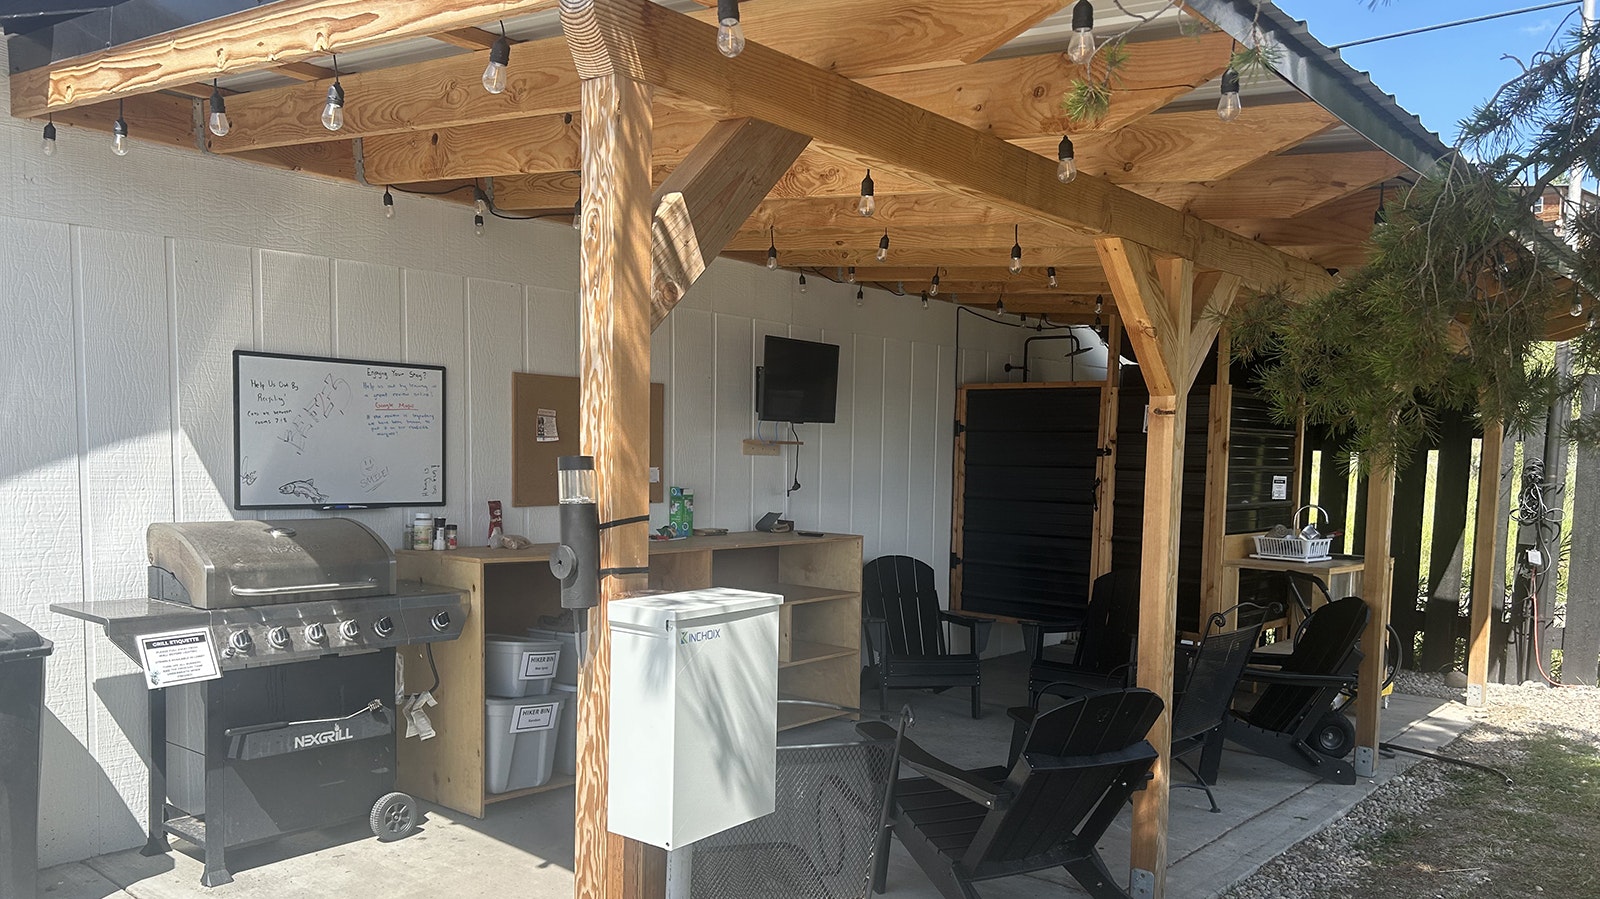 Outdoor space at the Jackalope Motor Inn in Pinedale provides a propane grill, television, Adirondack chairs, laundry and bins for hikers.